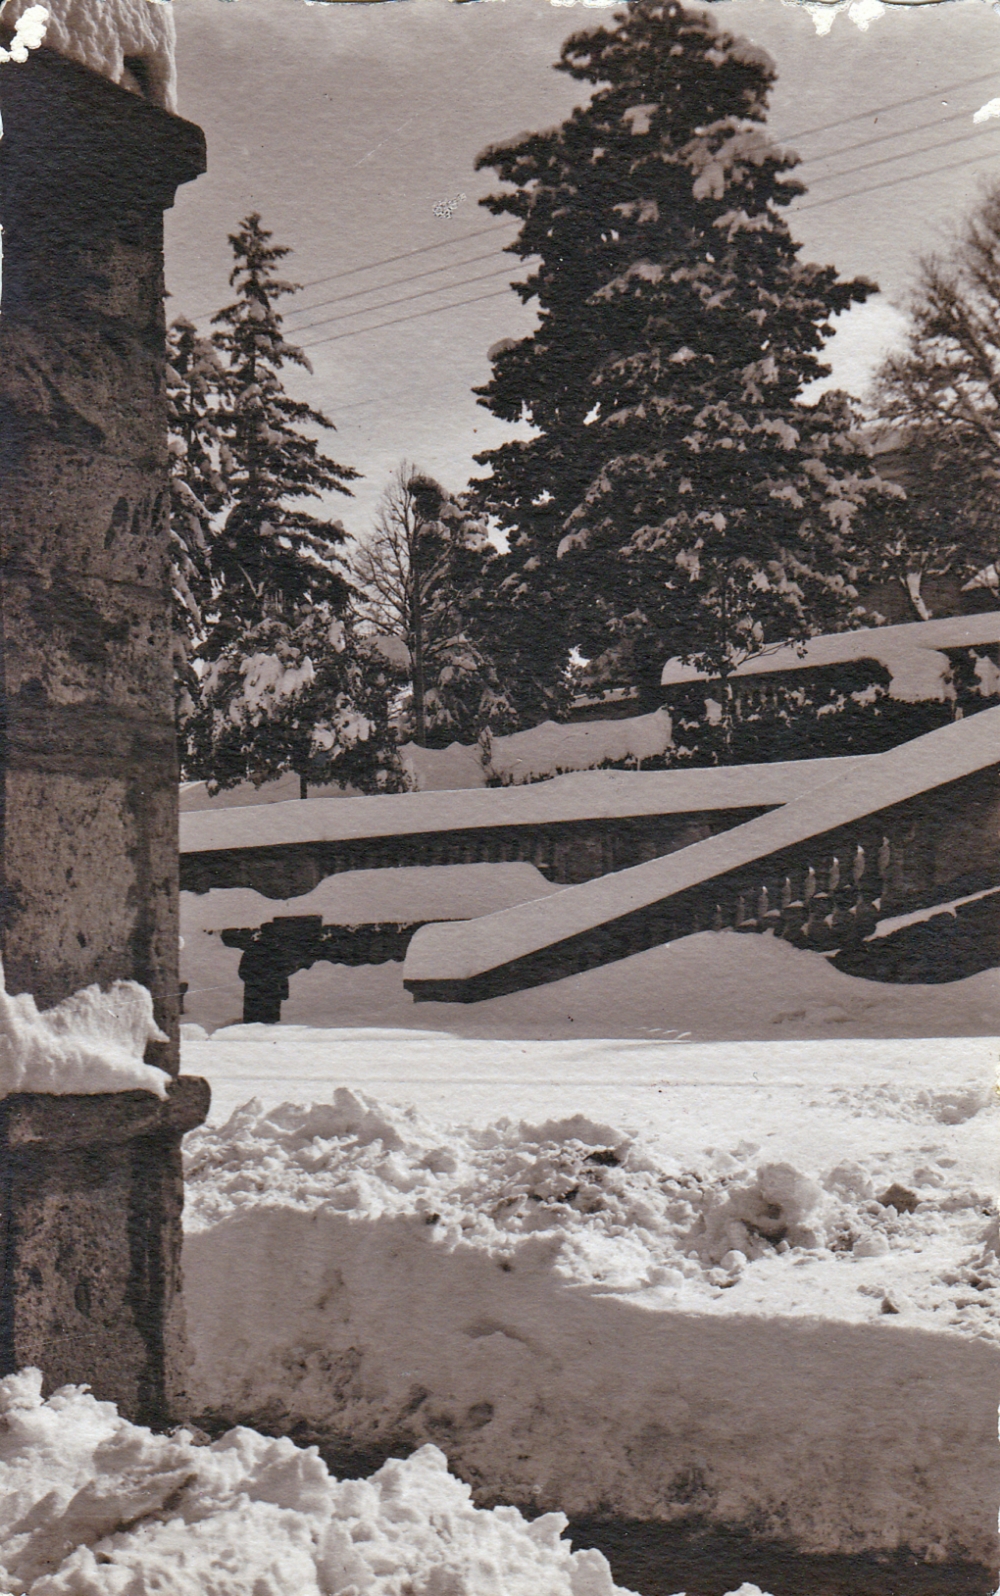 The “Great Snowfall” of 1929 in Ascoli – 1